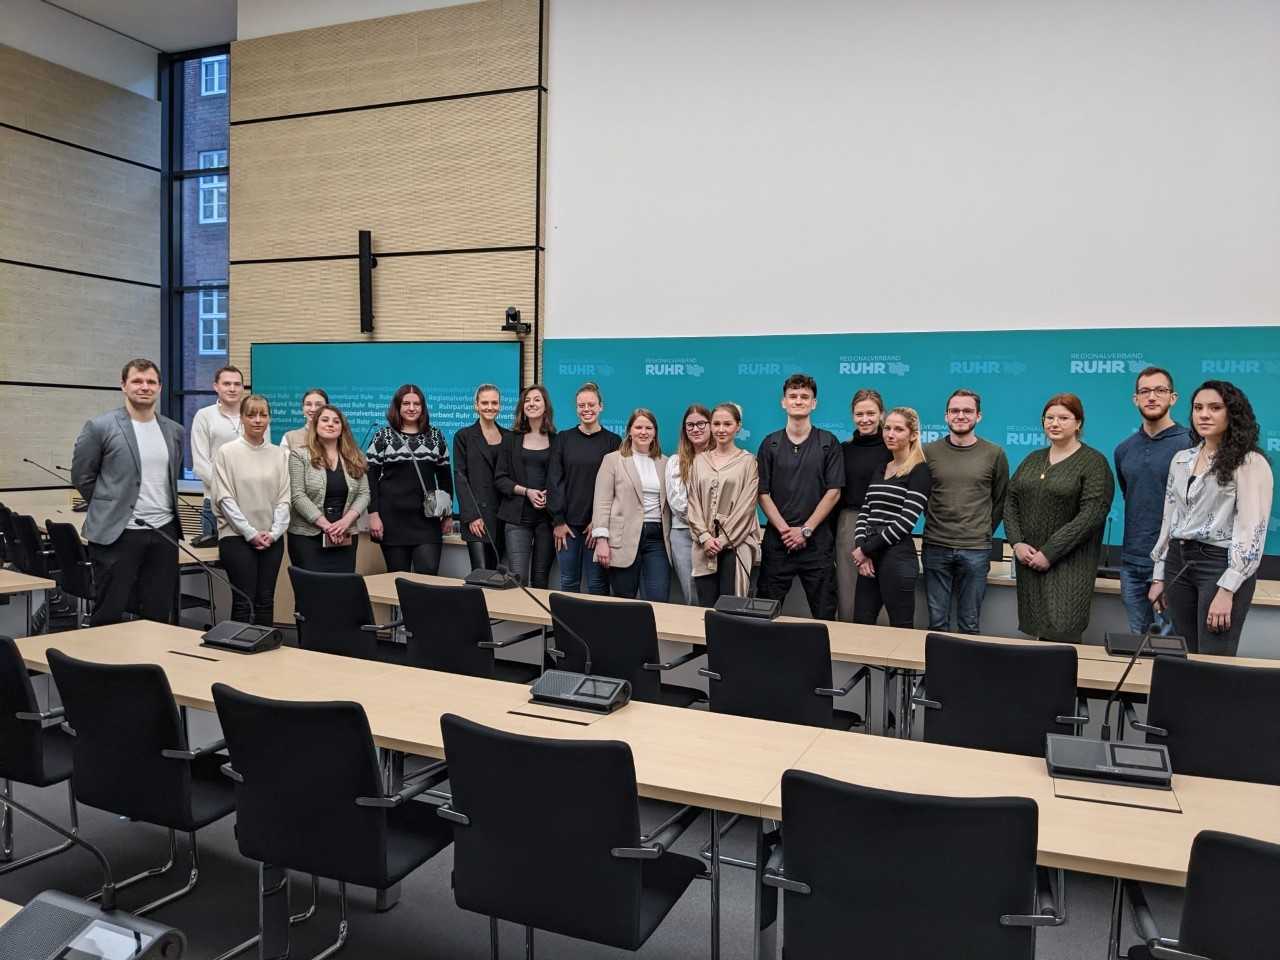 IAW Studierende im Ruhr Parlament